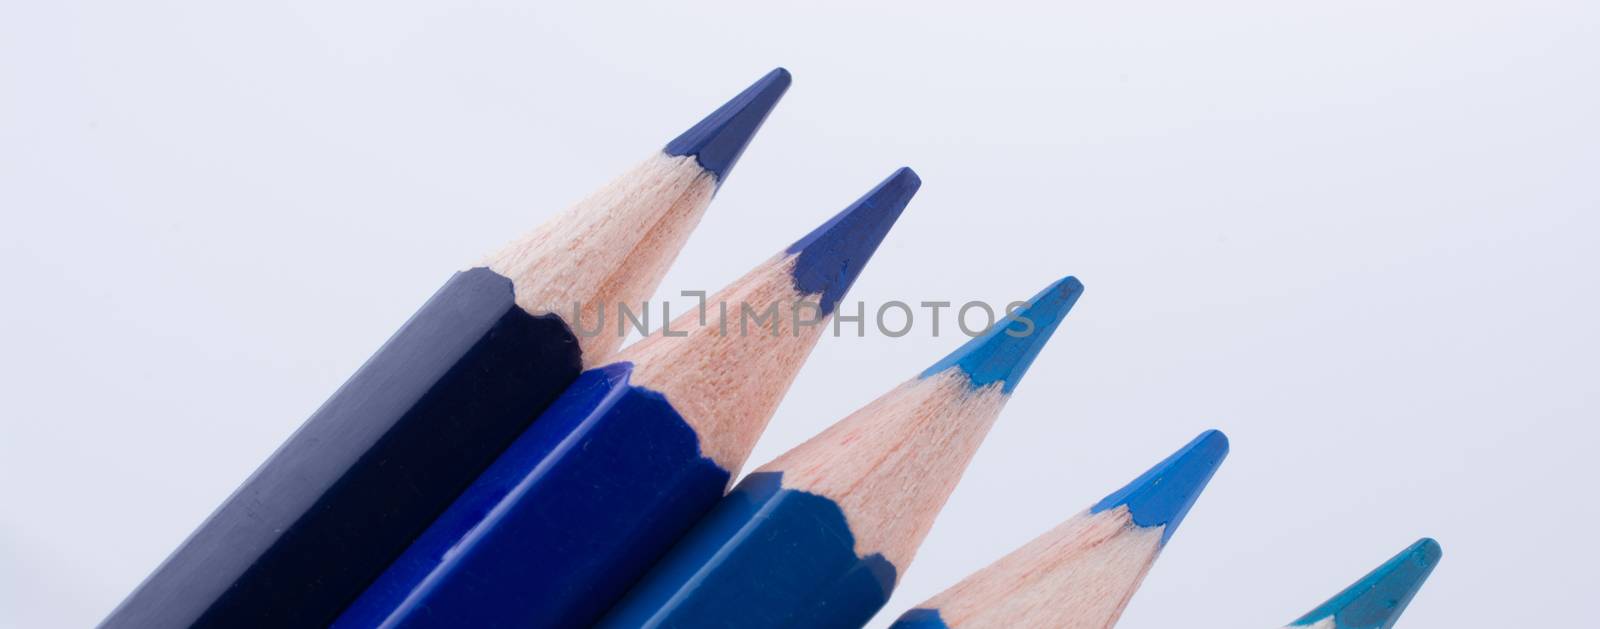 Color Pencils of various colors on a  white background